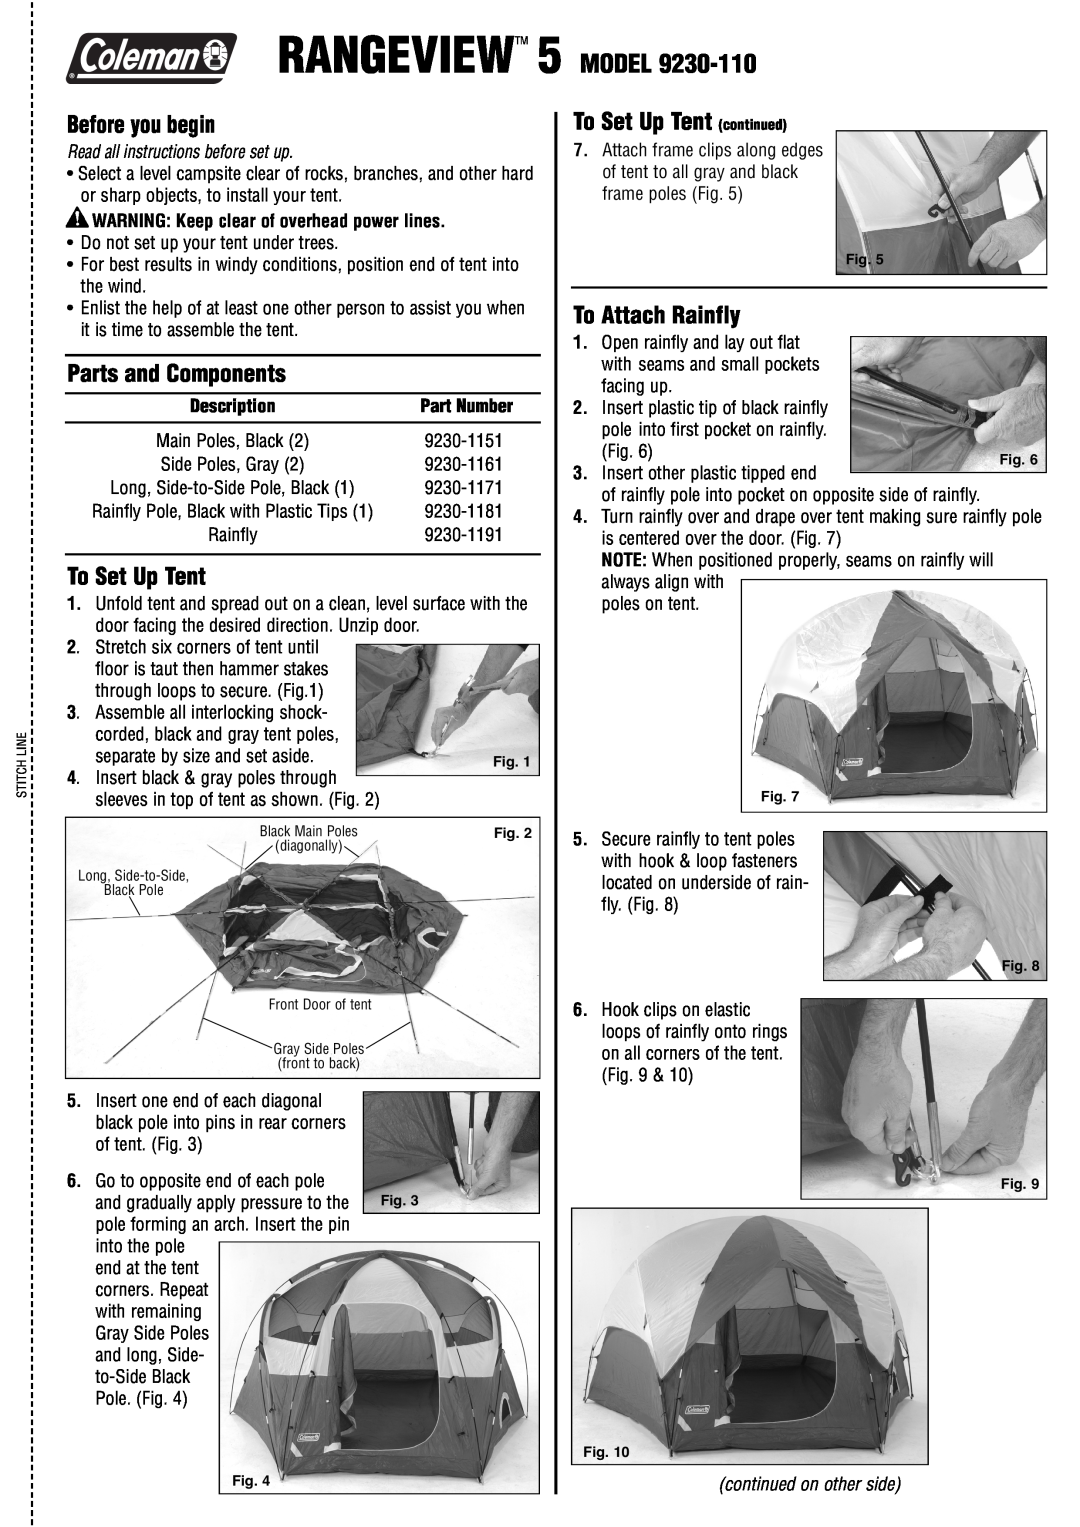 Coleman 9230-110 manual Before you begin, Parts and Components, To Set Up Tent continued, To Attach Rainfly 